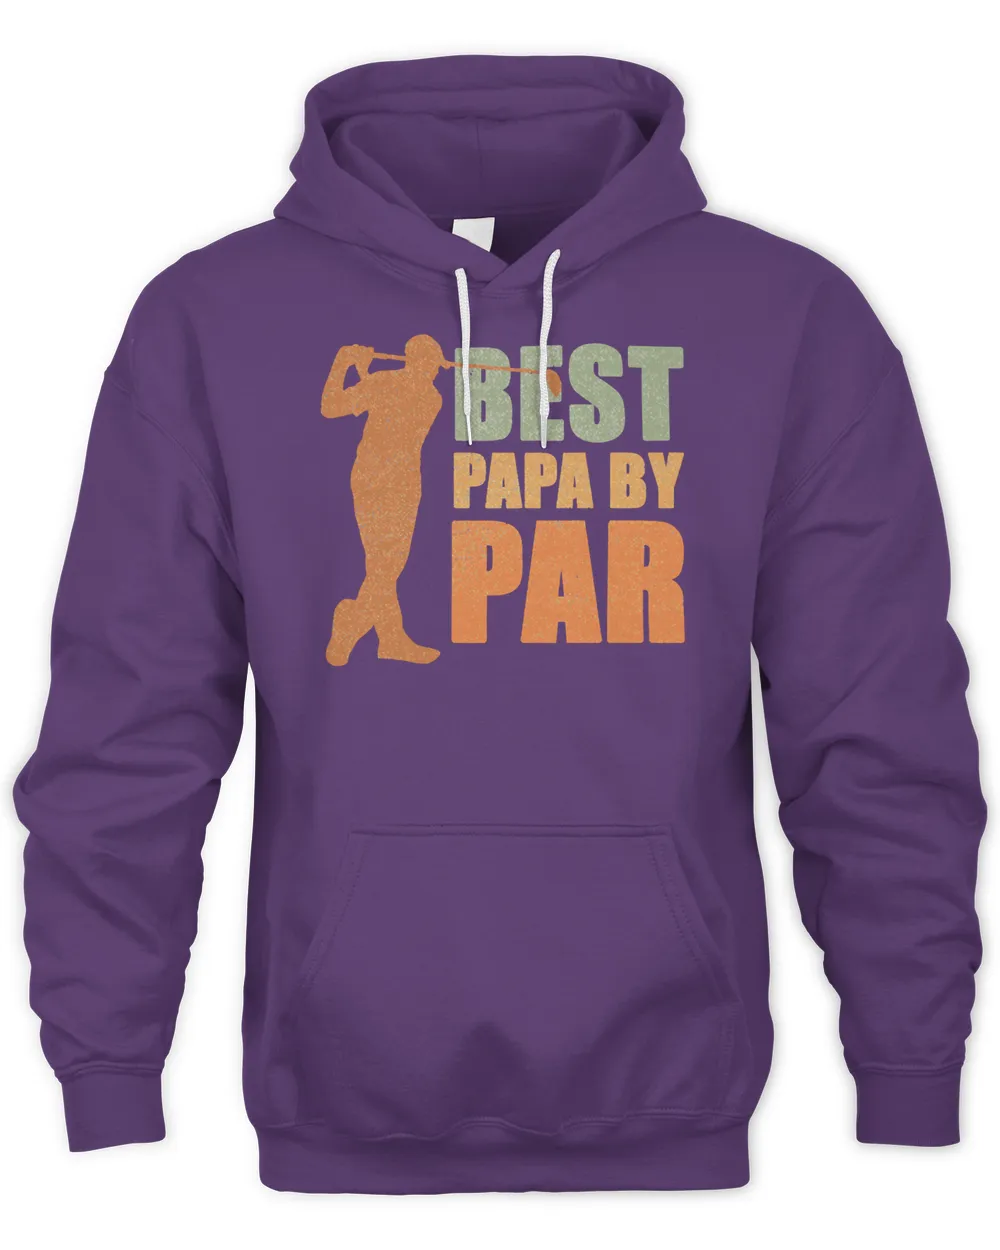 Father Grandpa Best papa By Par 536 Family Dad